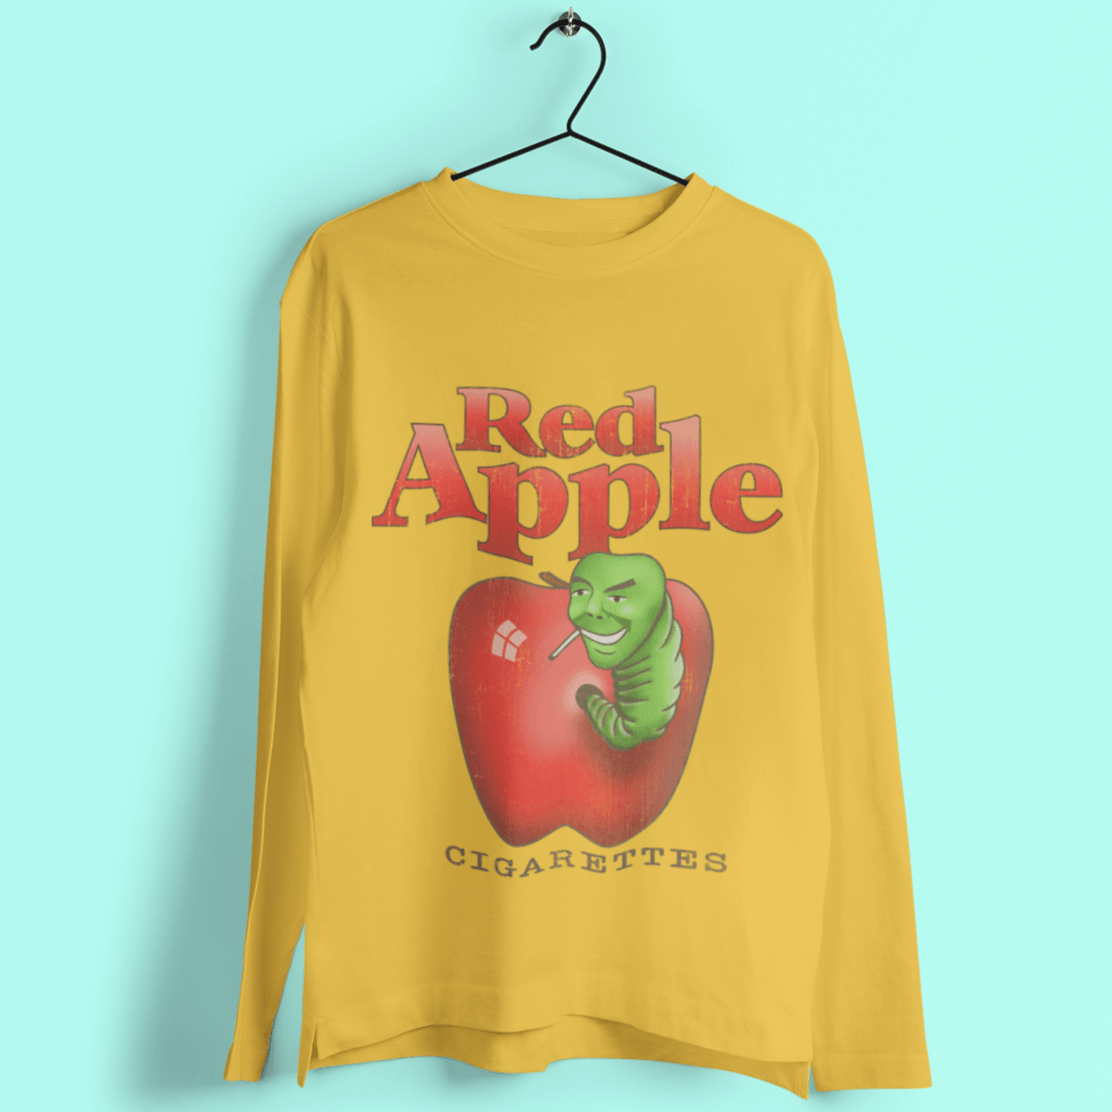 Red Apple Cigarettes Long Sleeve Top 8Ball